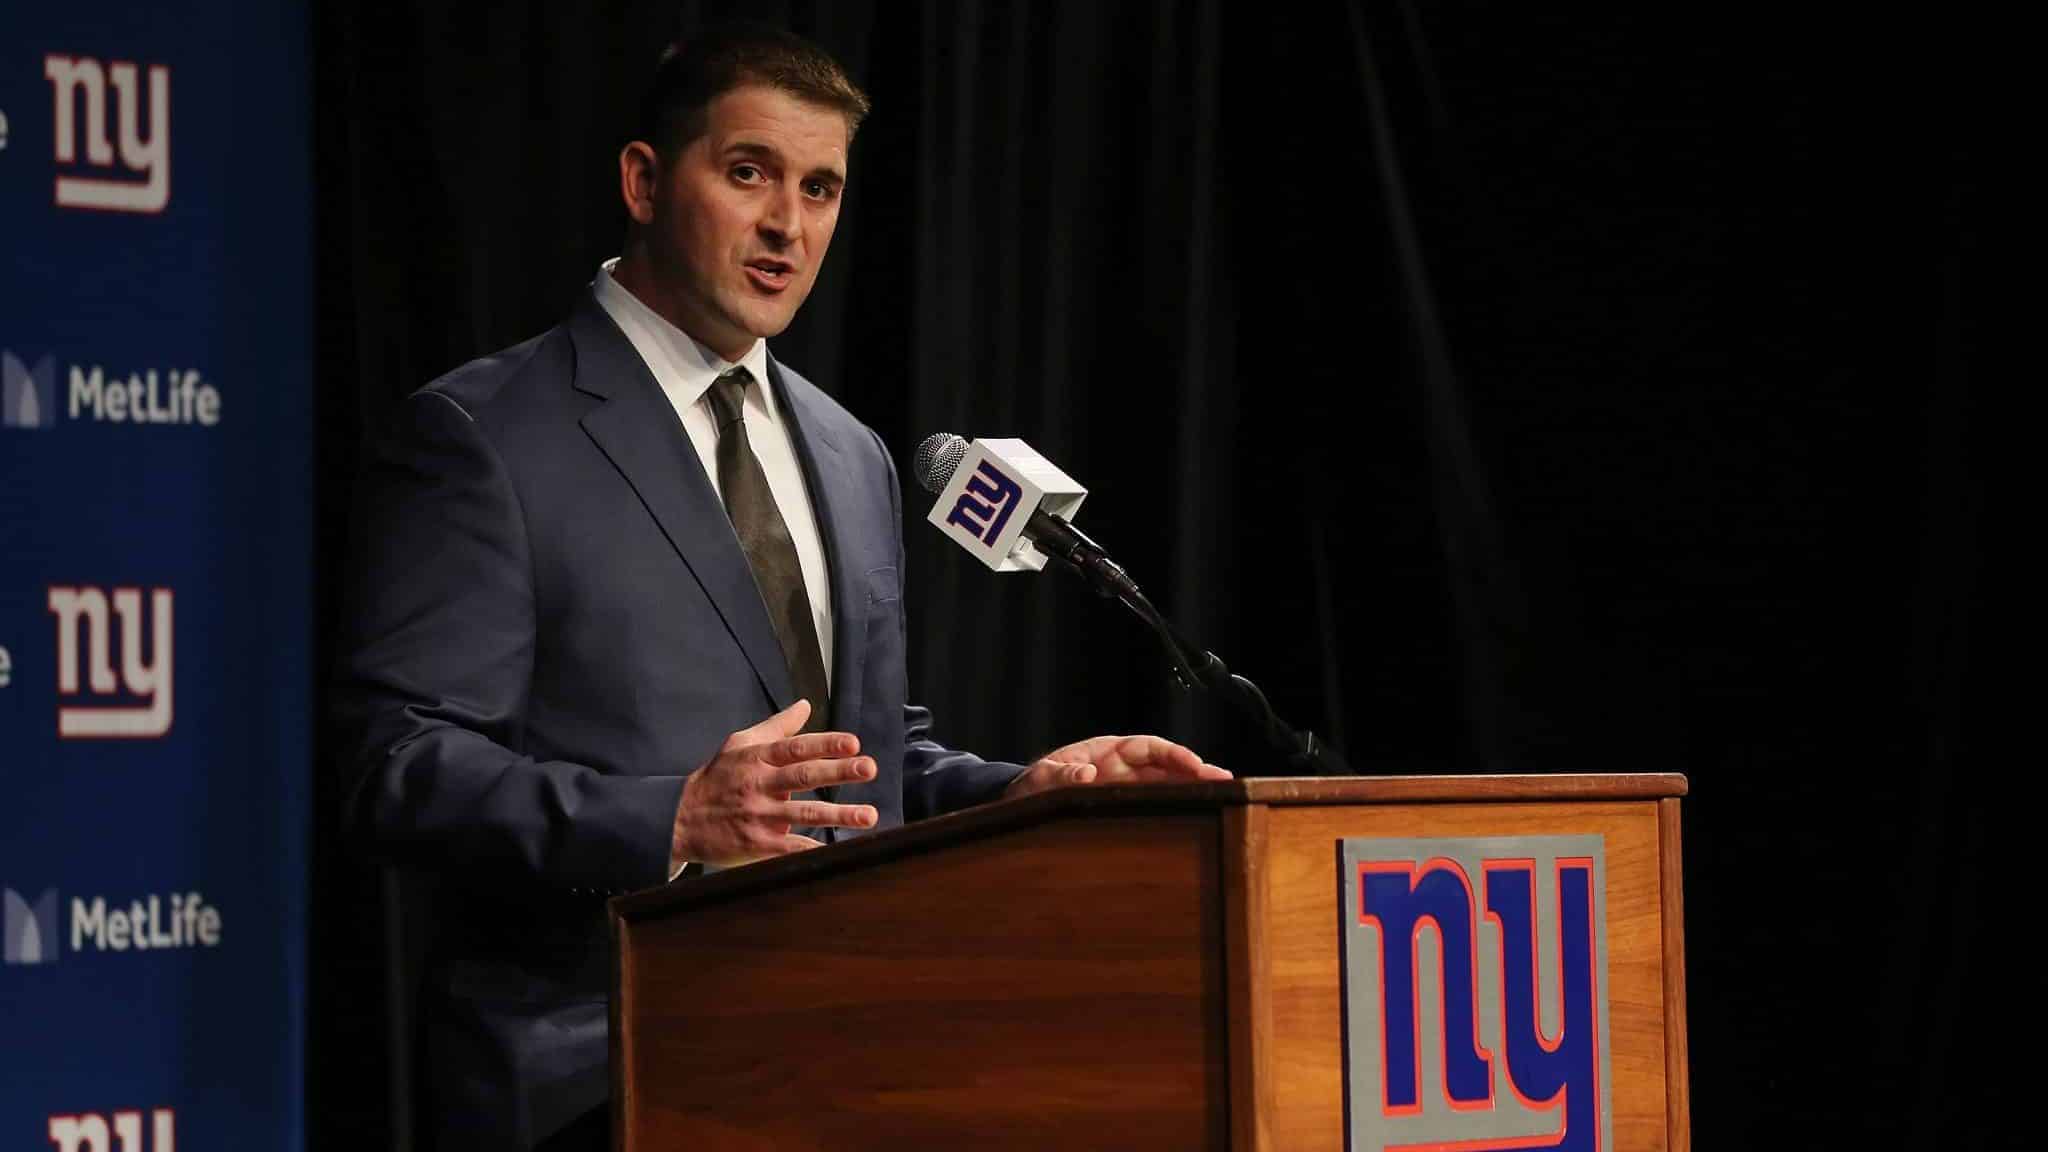 EAST RUTHERFORD, NJ - JANUARY 09: Joe Judge talks to the media after he was introduced as the new head coach of the New York Giants during a news conference at MetLife Stadium on January 9, 2020 in East Rutherford, New Jersey.